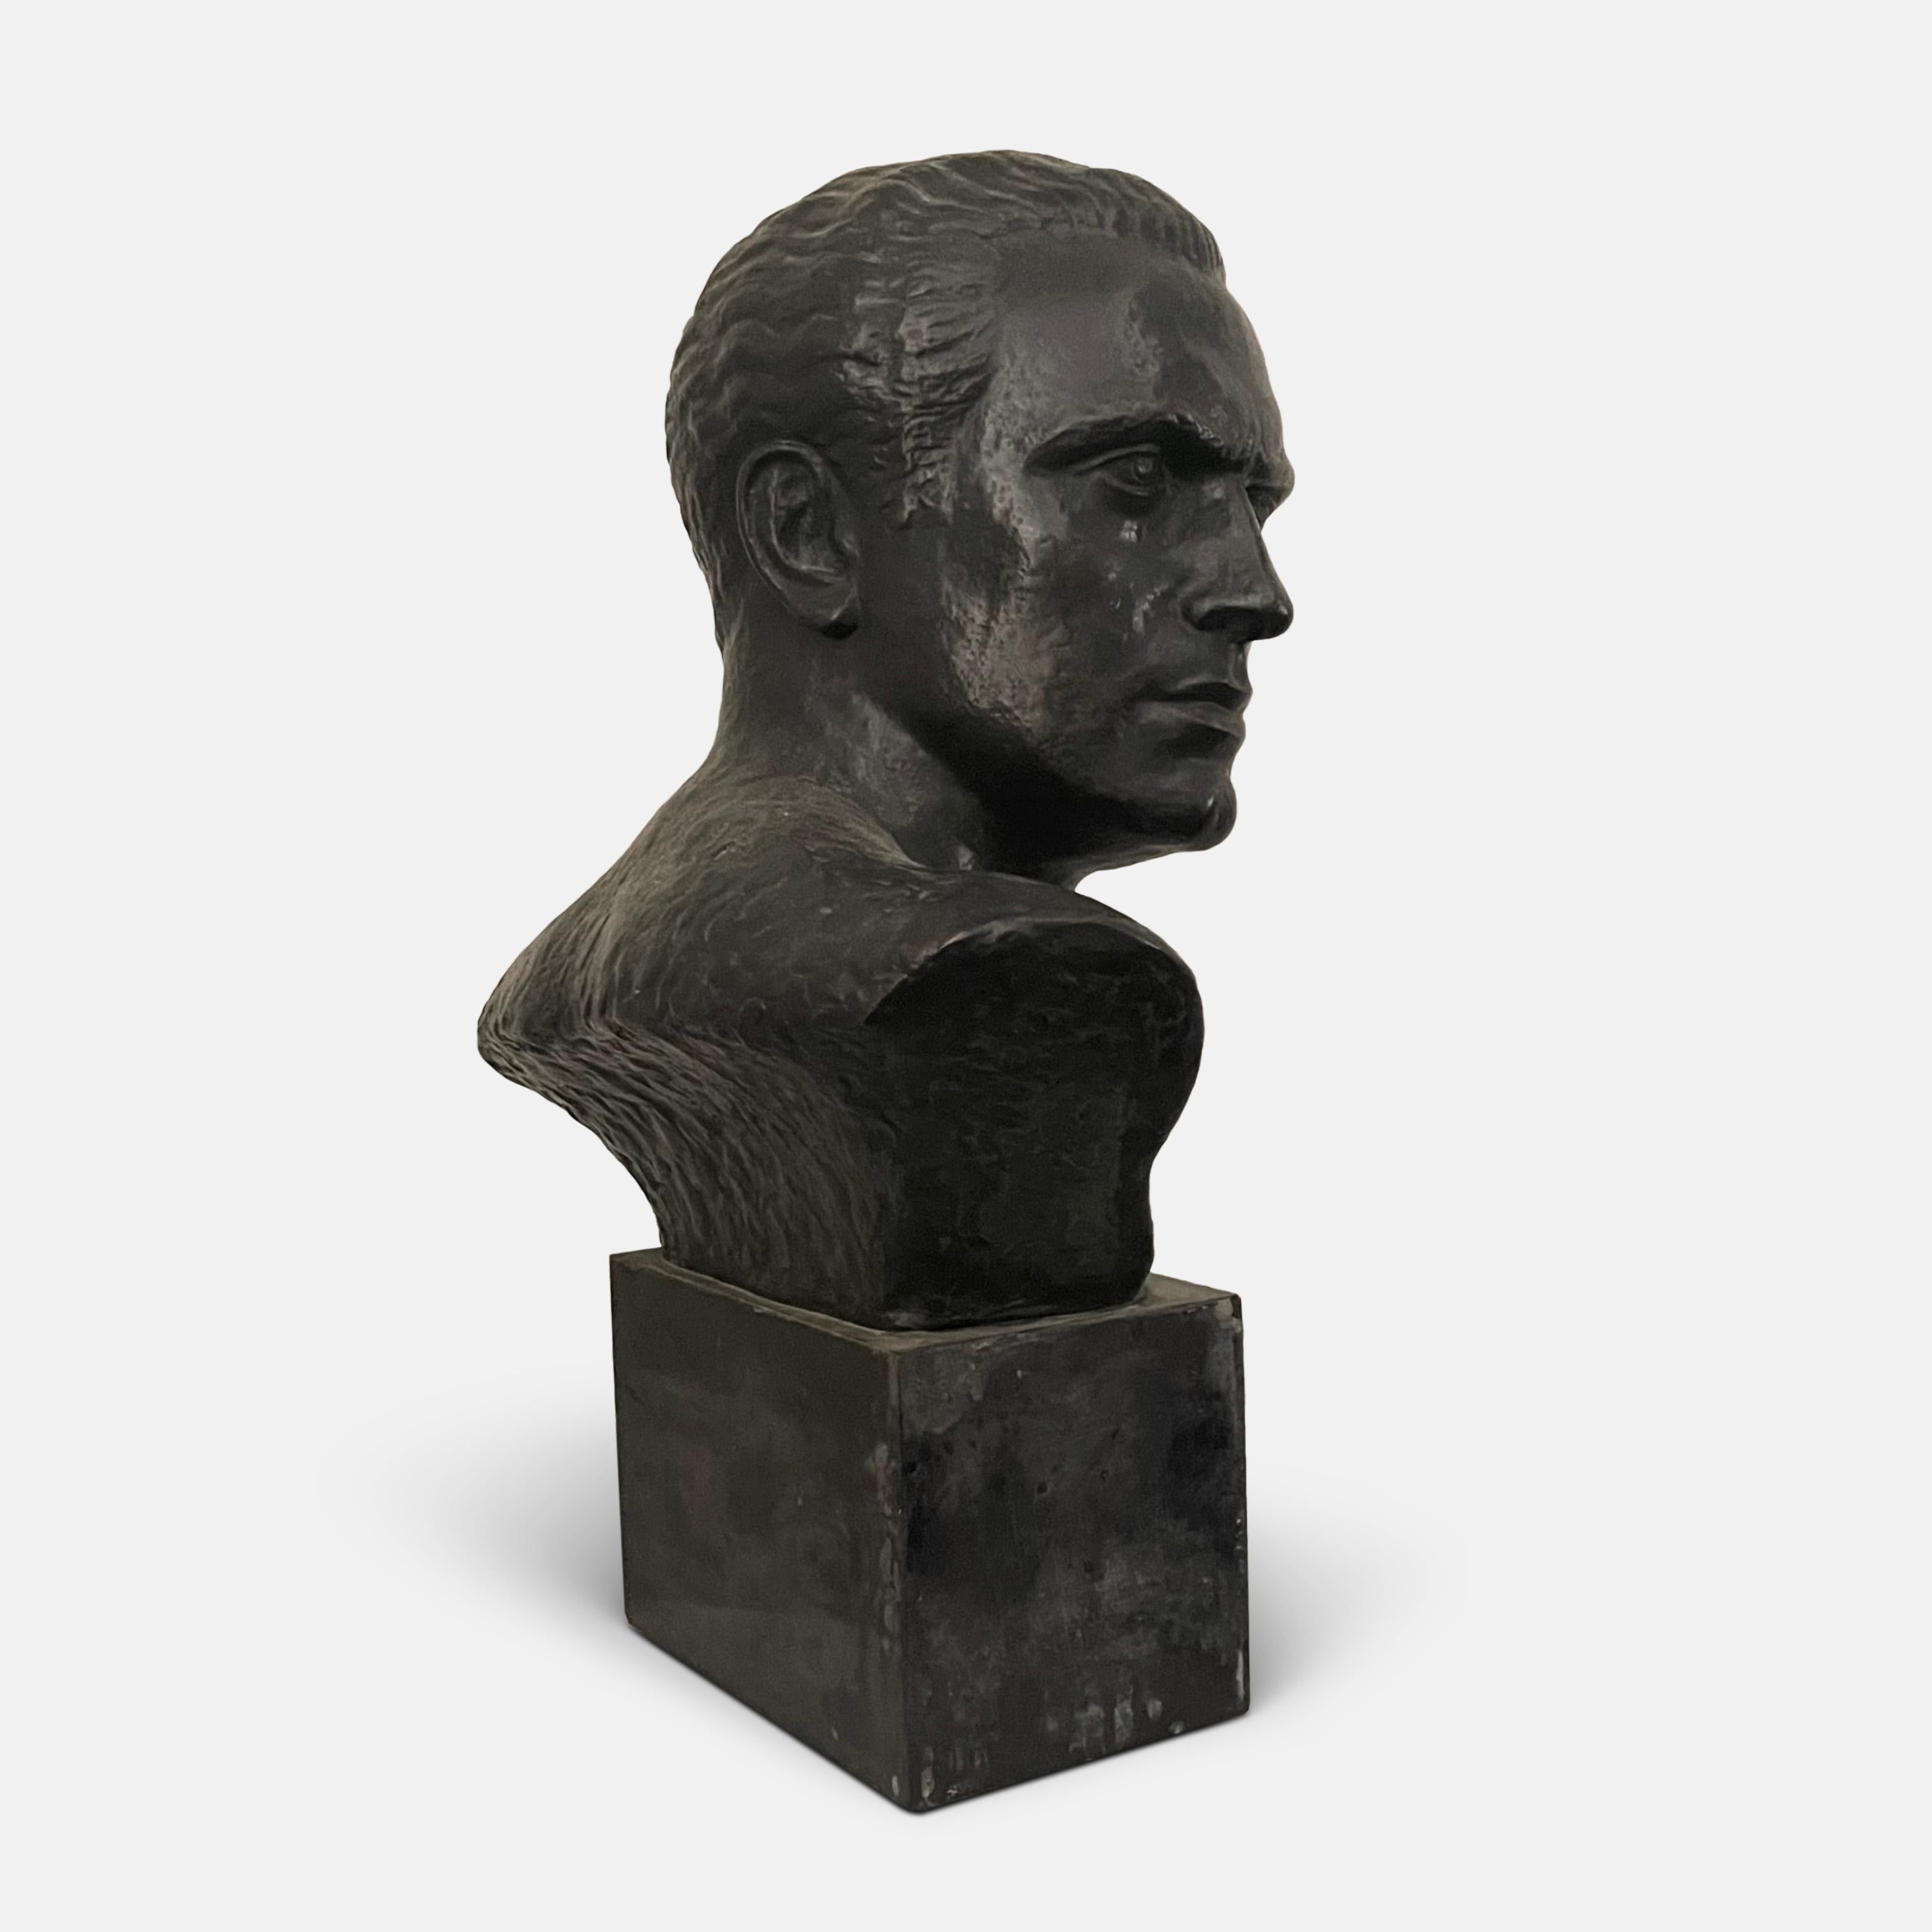 This striking profile, classically heroic, yet distinctly French, courageous and reserved, belongs to the famed early French aviator Jean Mermoz. A French Air Force and commercial pilot, friend and icon to Antoine de Saint-Exupéry, Mermoz was known